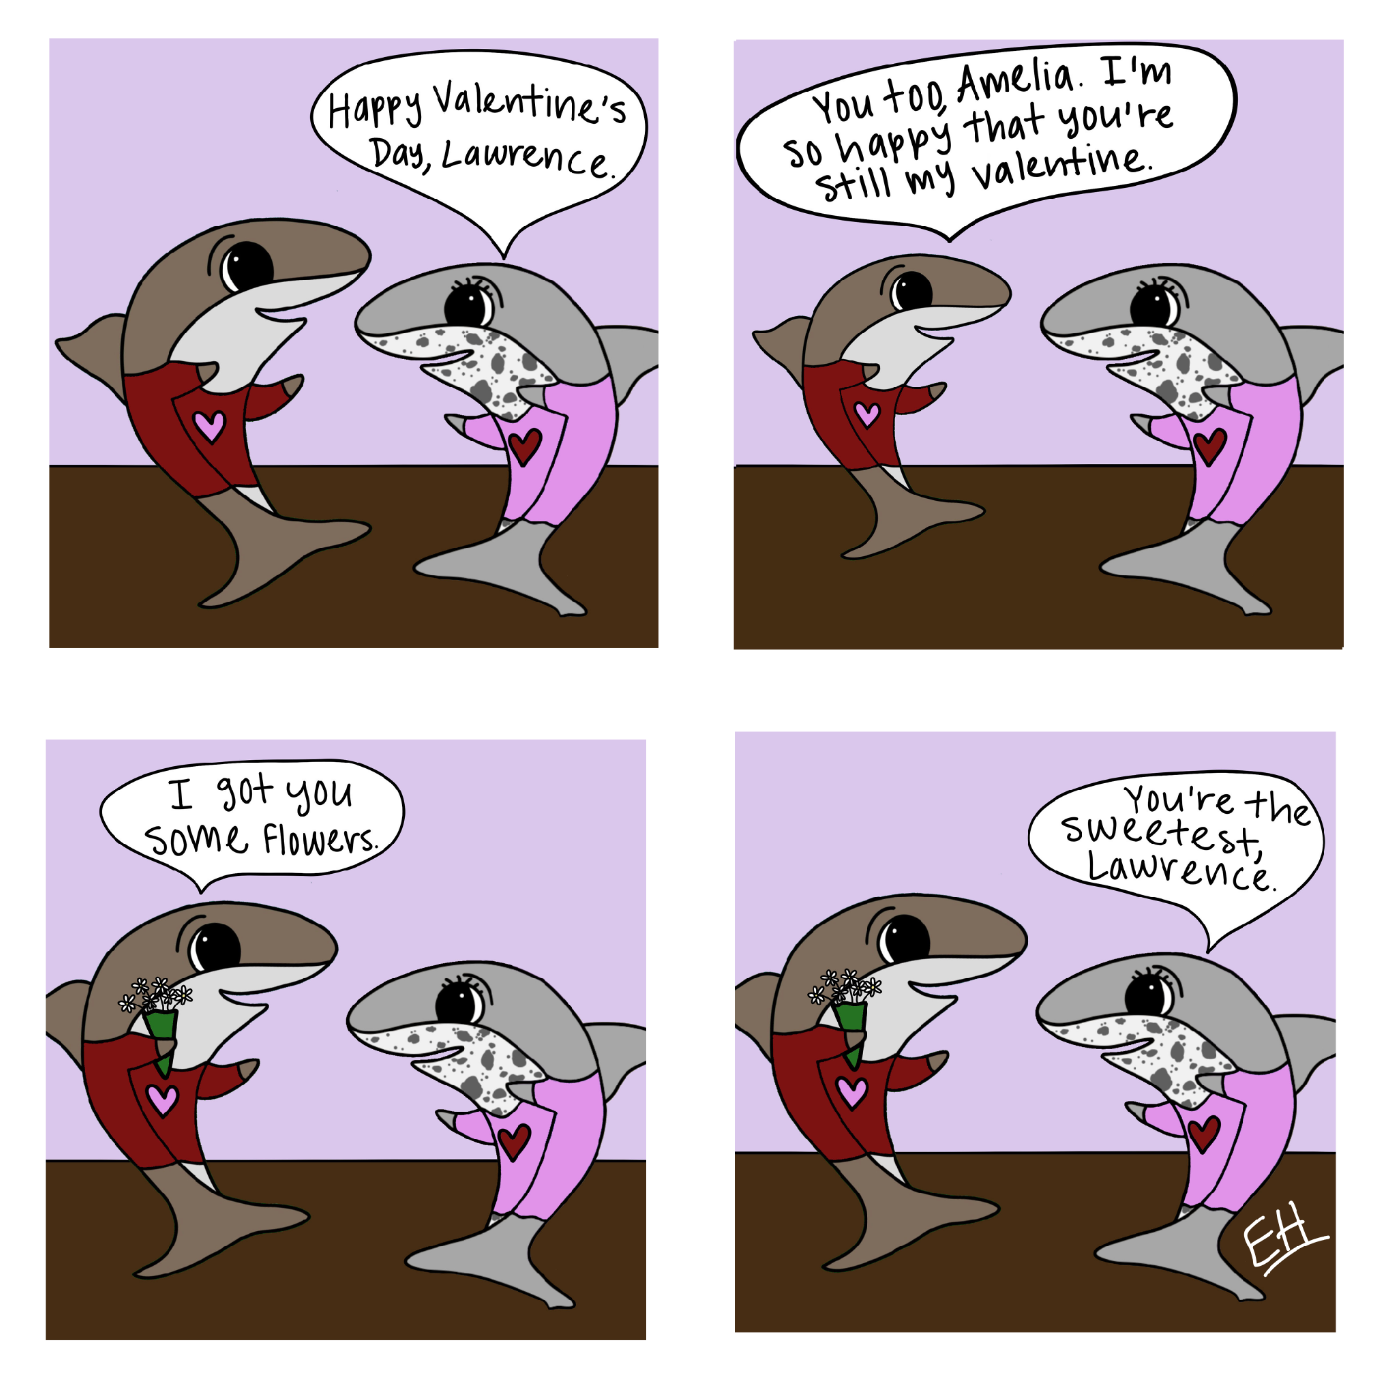 Lawrence the Crocodile Shark is seen with his girlfriend Amelia. Amelia is a Salmon Shark. Lawrence is wearing a red shirt with a pink heart, and Amelia is wearing a pink shirt with a red heart. In the first panel, Amelia says, “Happy Valentine’s Day, Lawrence.” In the second panel, Lawrence says, “You too, Amelia. I’m so happy that you’re still my valentine.” In the third panel Lawrence is holding a green bouquet of daisies. He says, “I got you some flowers.” In the fourth panel Amelia says, “You’re the sweetest, Lawrence.”